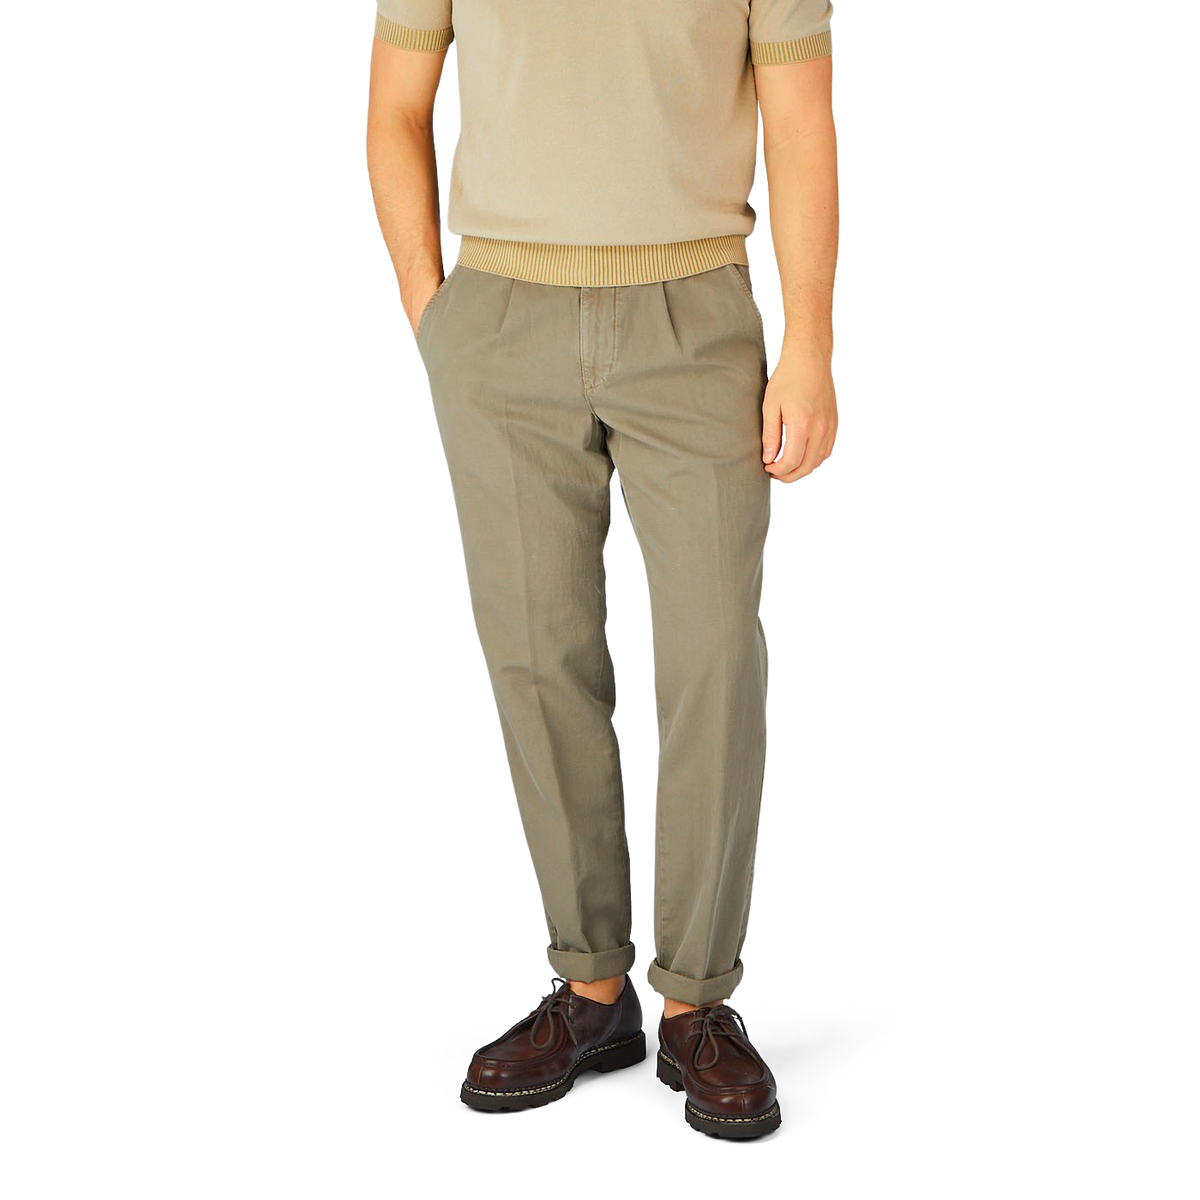 A man wearing Briglia Olive Cotton Linen BG59 Pleated Chinos and an upcycled sweater.